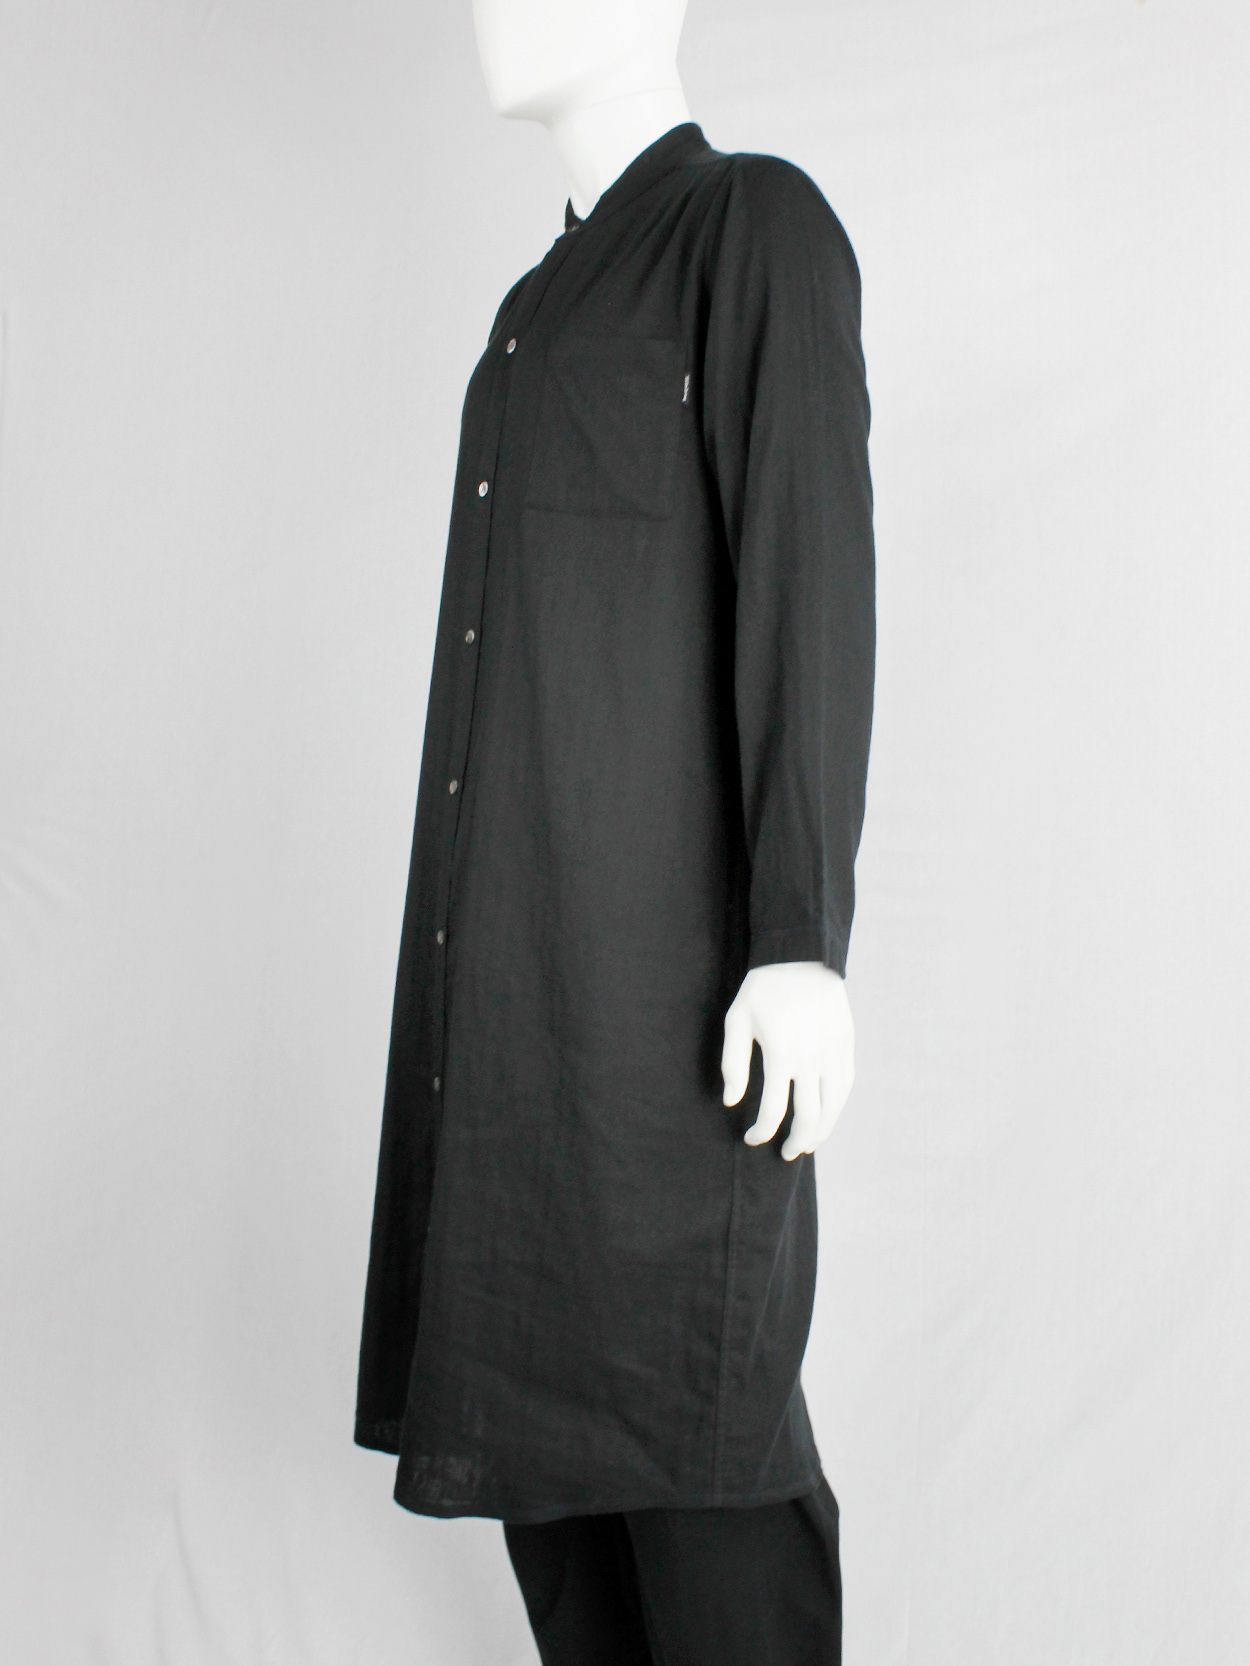 Y’s for living black extra long minimalist shirt with contrasting white buttons (13)